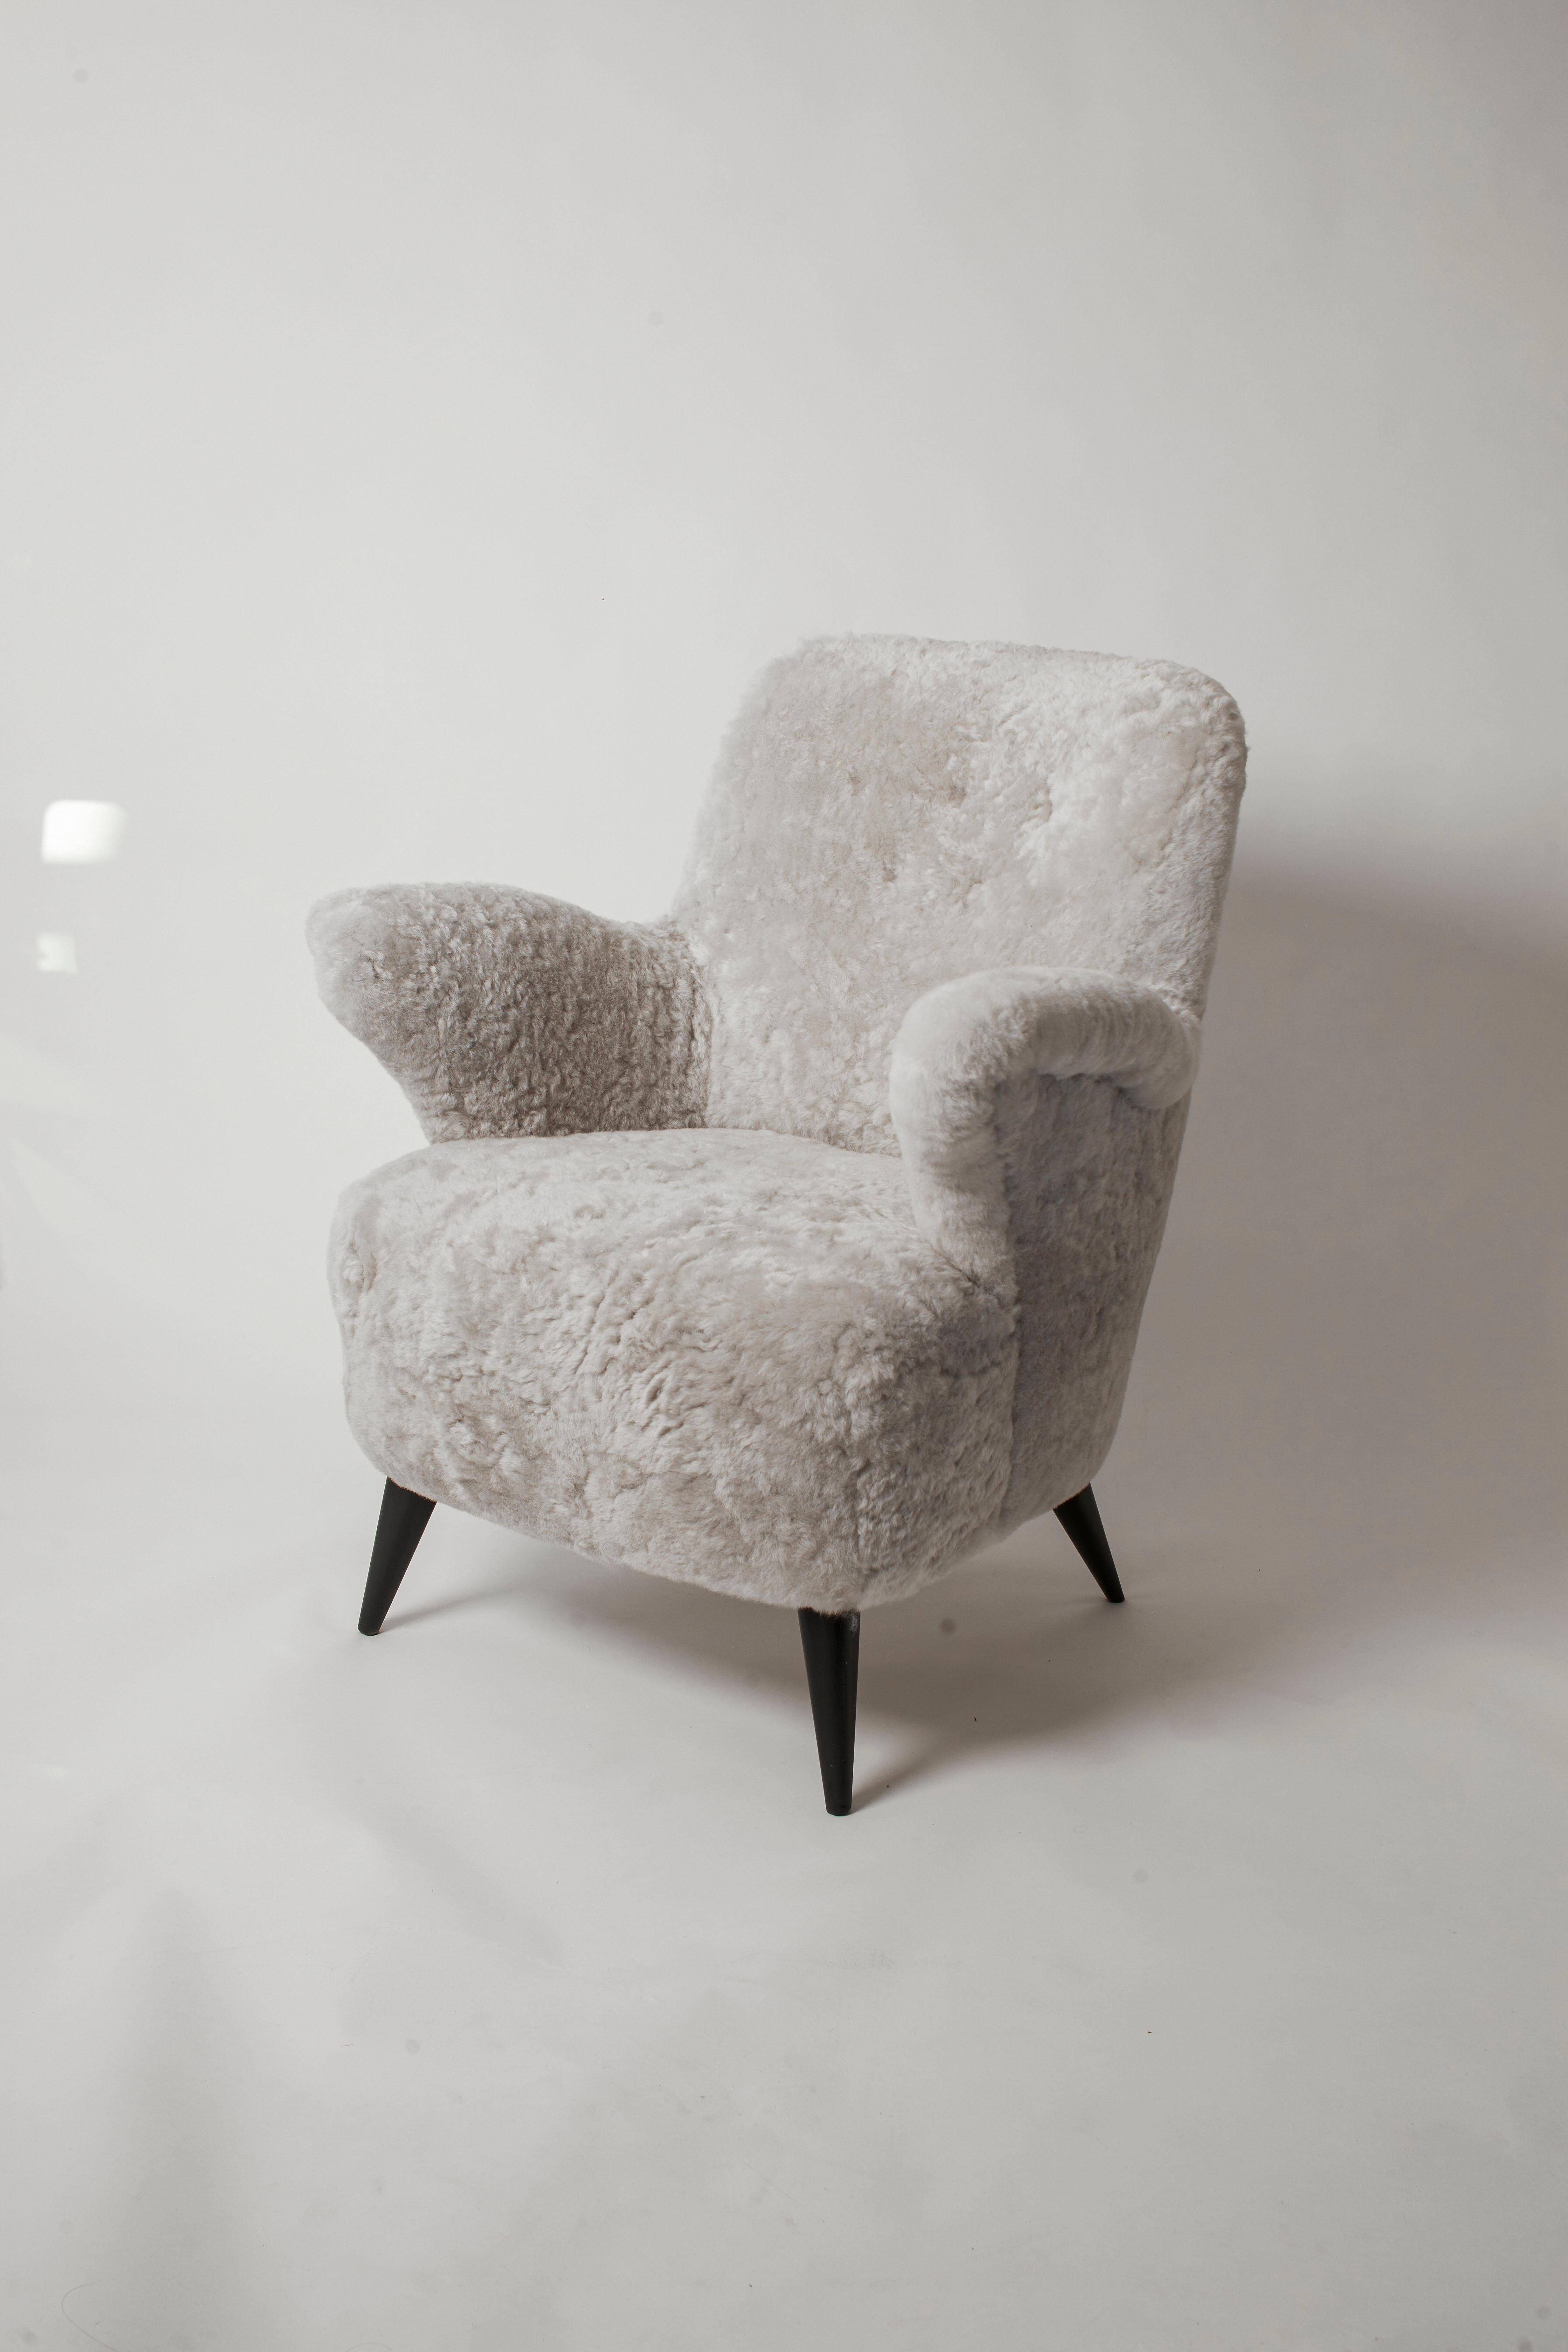 Italian 1950's Pair of Arm Chairs Restored & Reupholstered in Rock Shearling  1